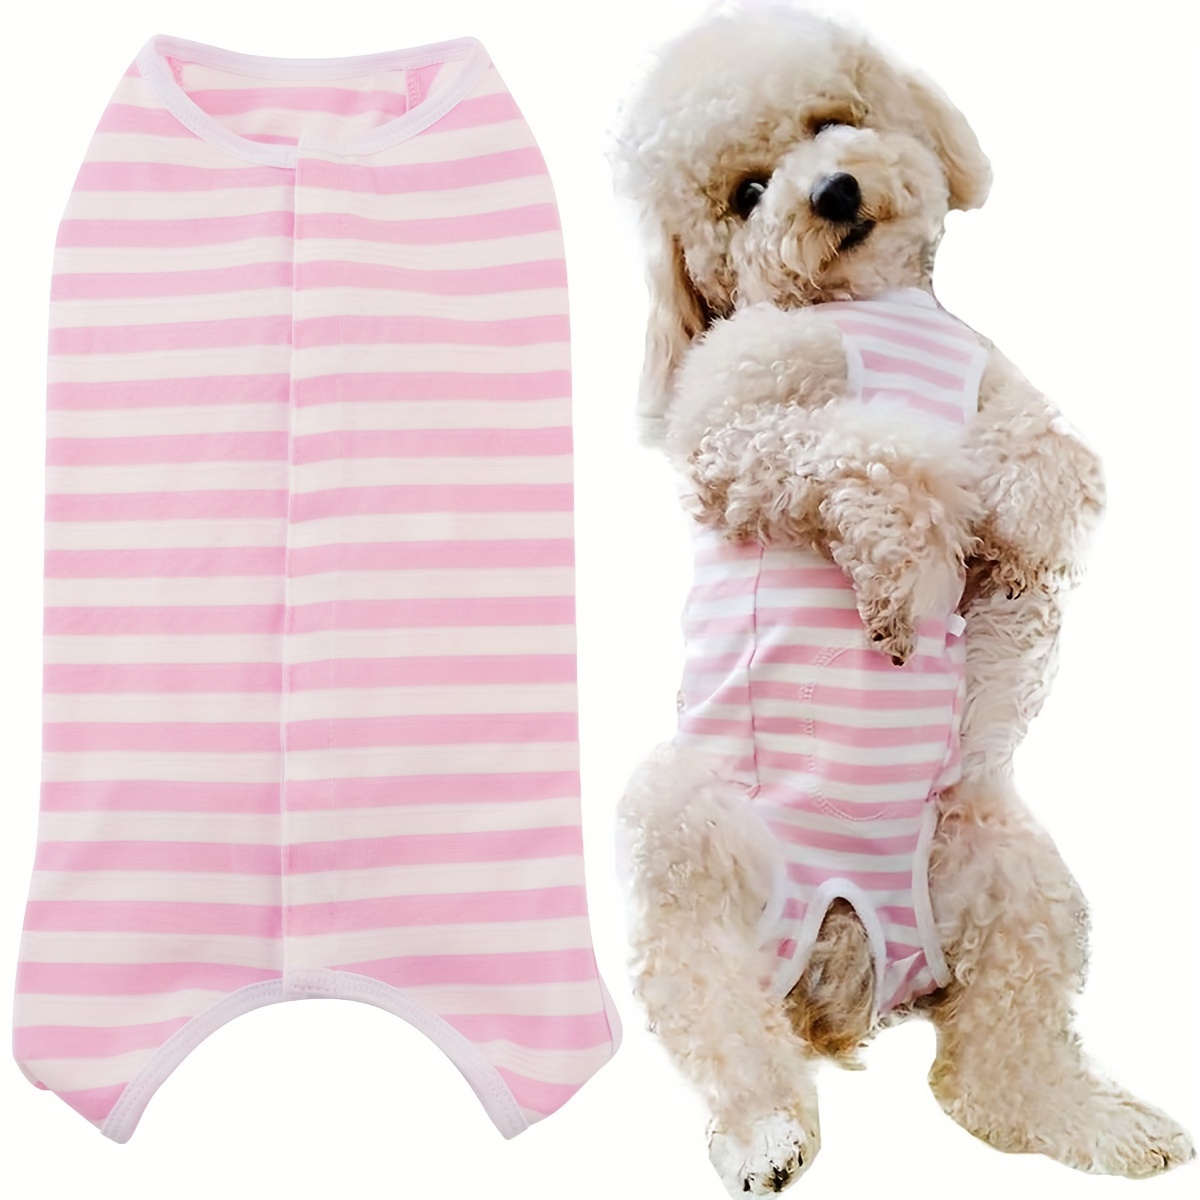 Dog Recovery Suit Surgery Post Spay Neuter Body Suit Male - Temu